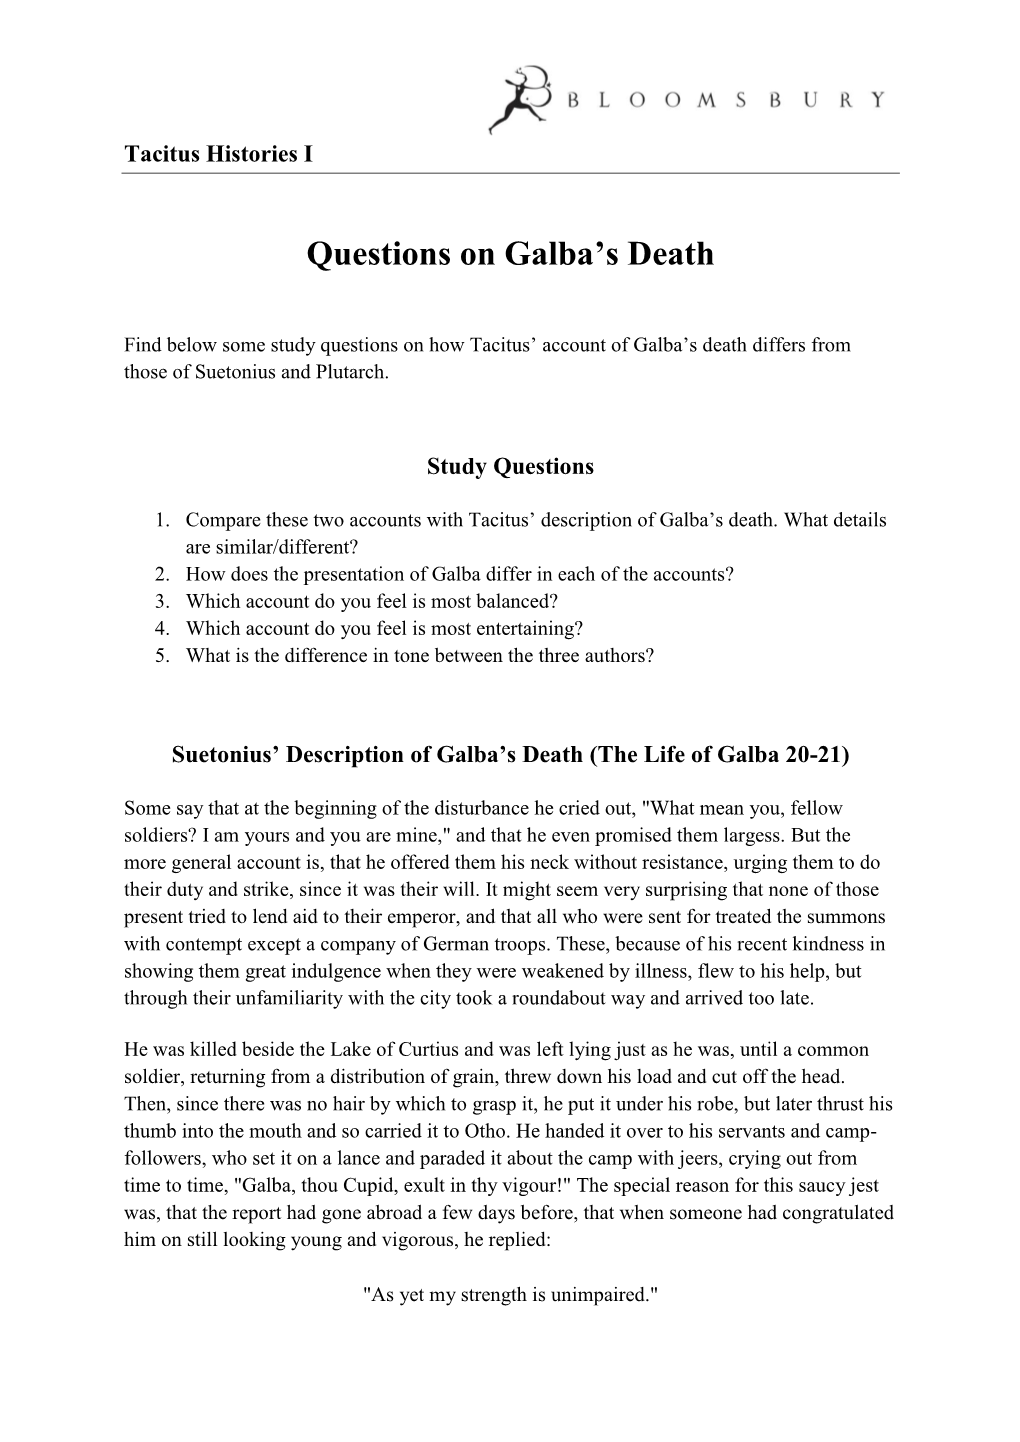 Questions on Galba's Death